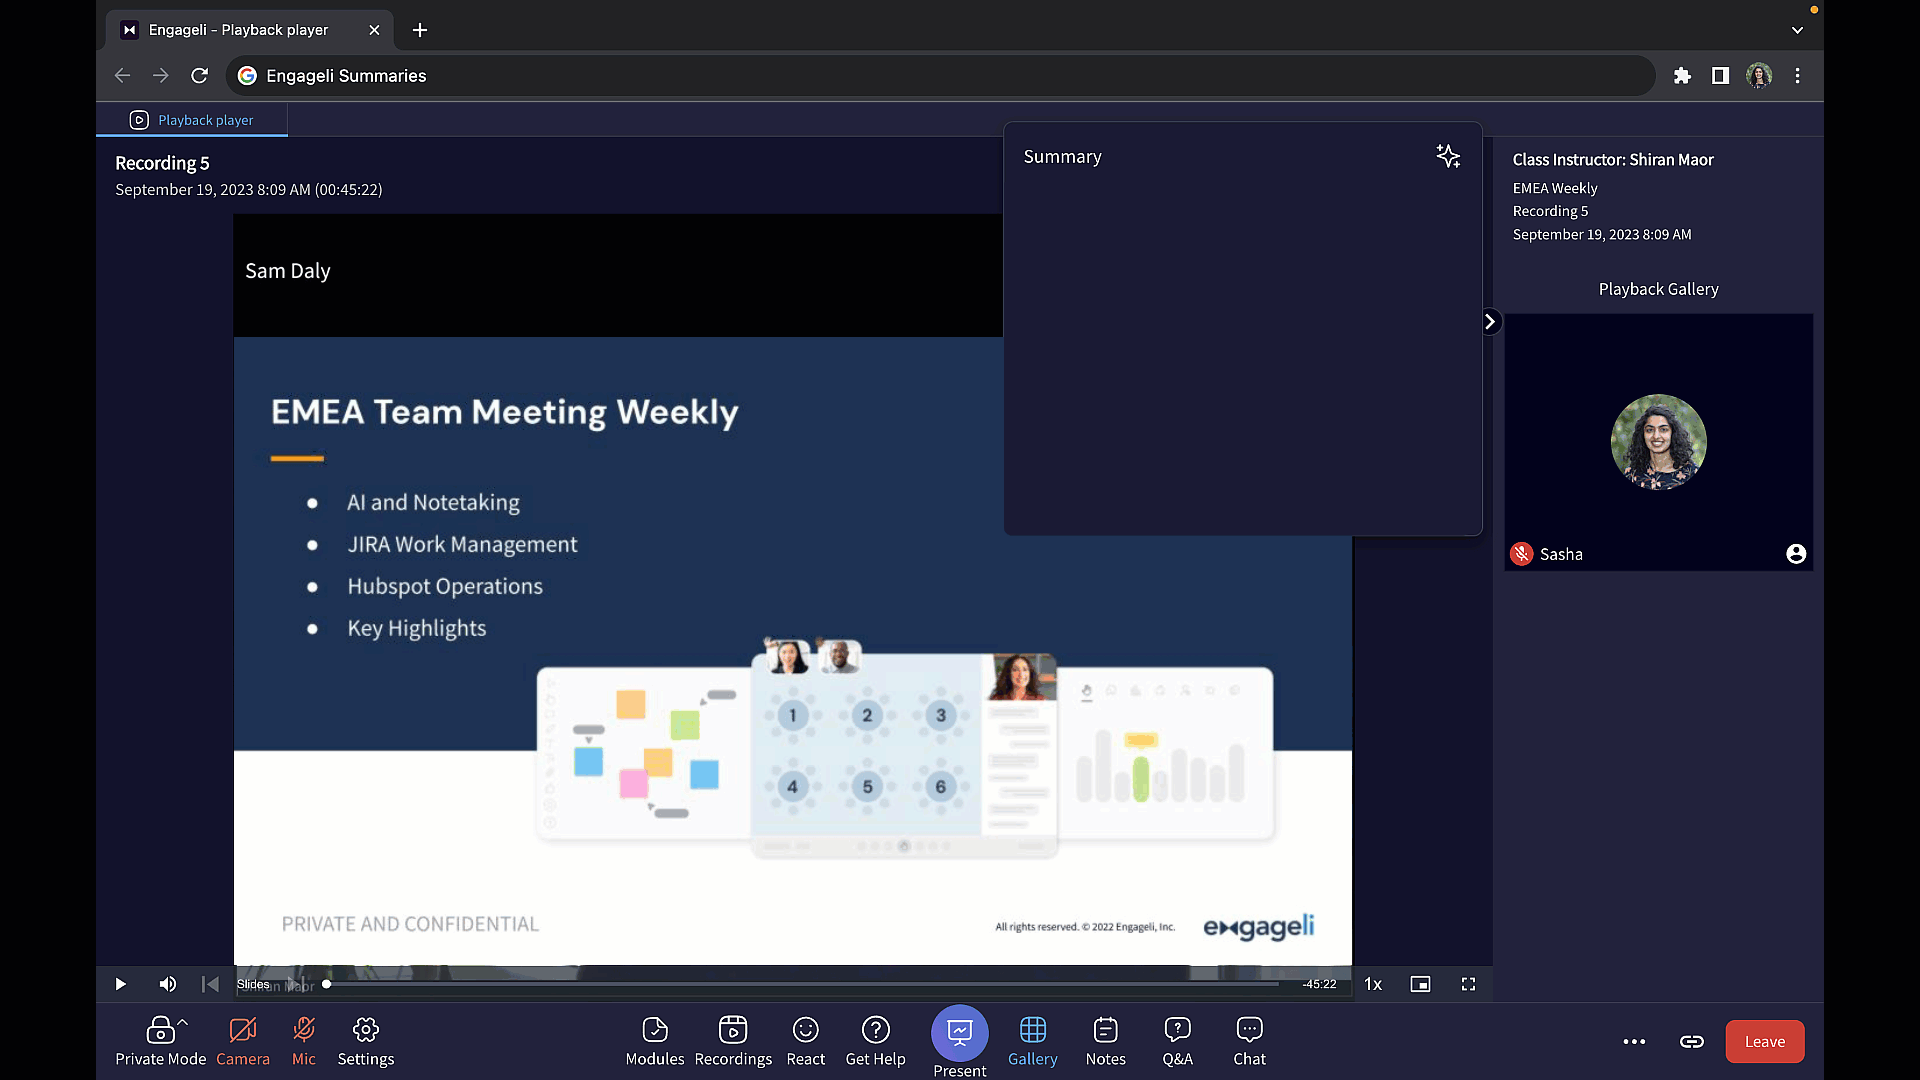 A GIF of Engageli's AI Summaries recapping a meeting held on Engageli